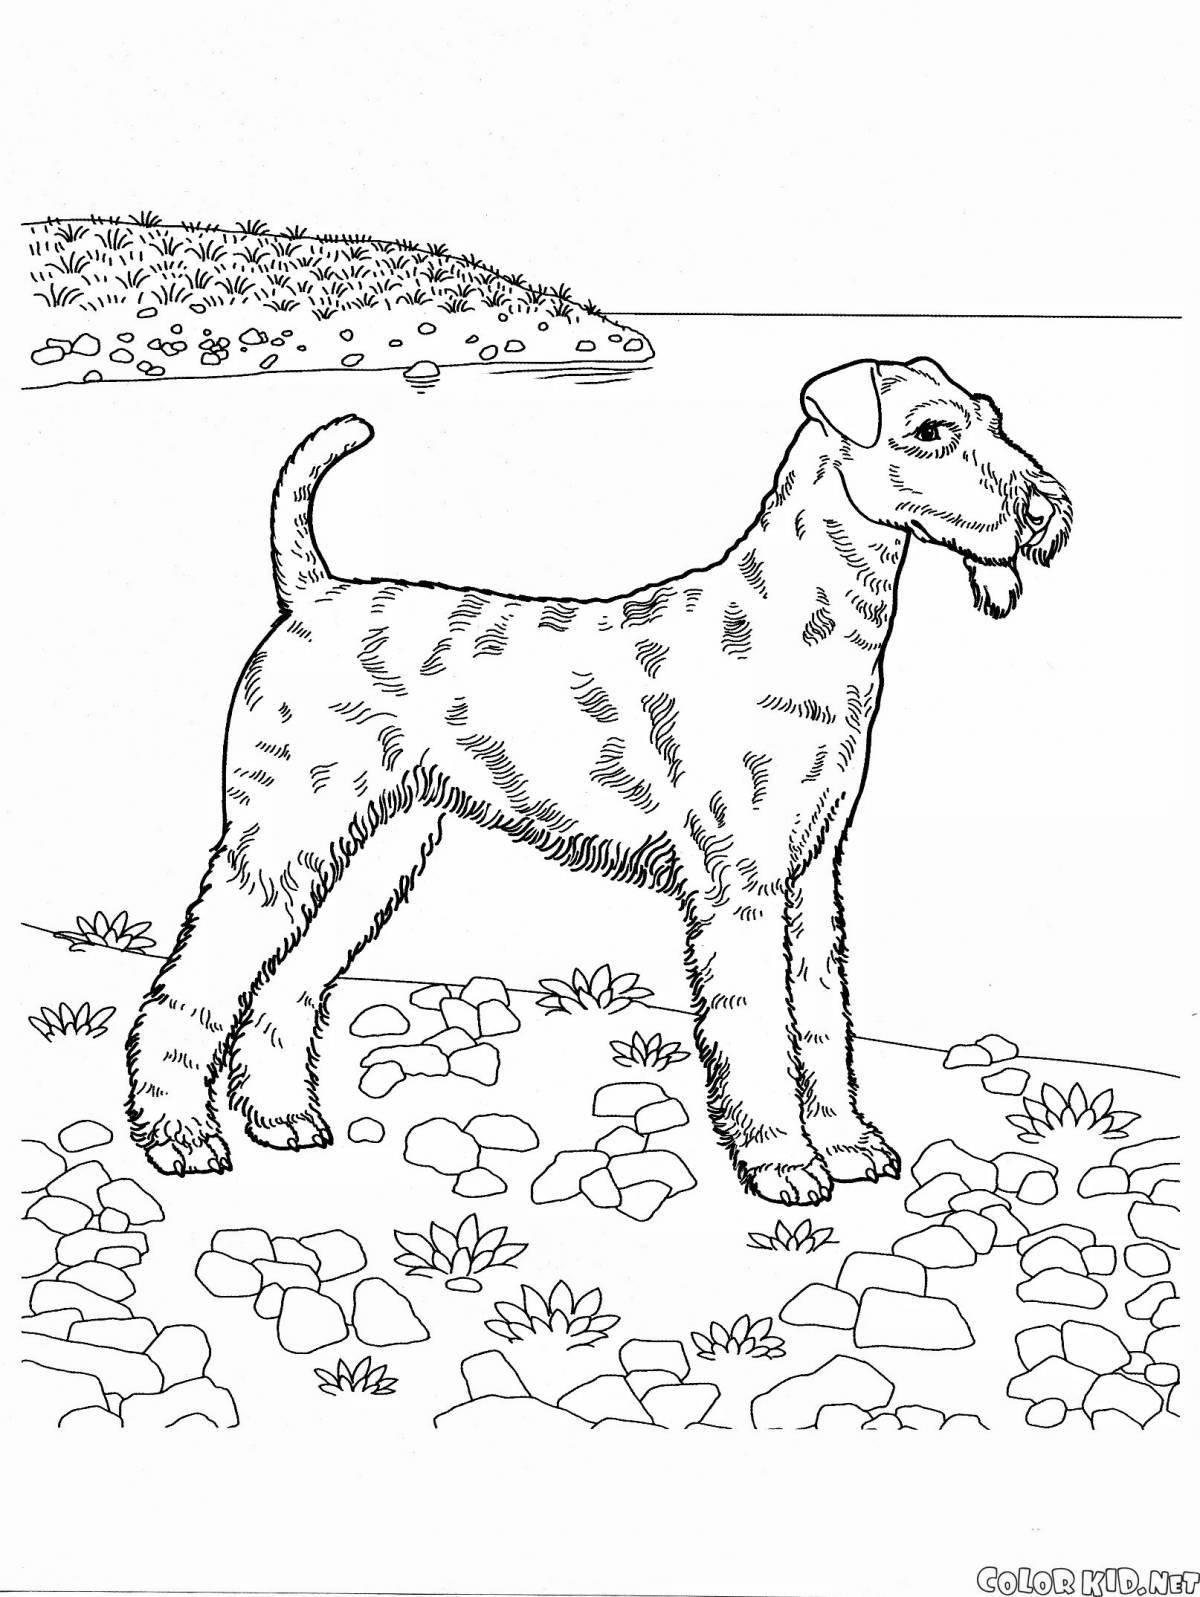 Exciting service dog coloring pages for kids